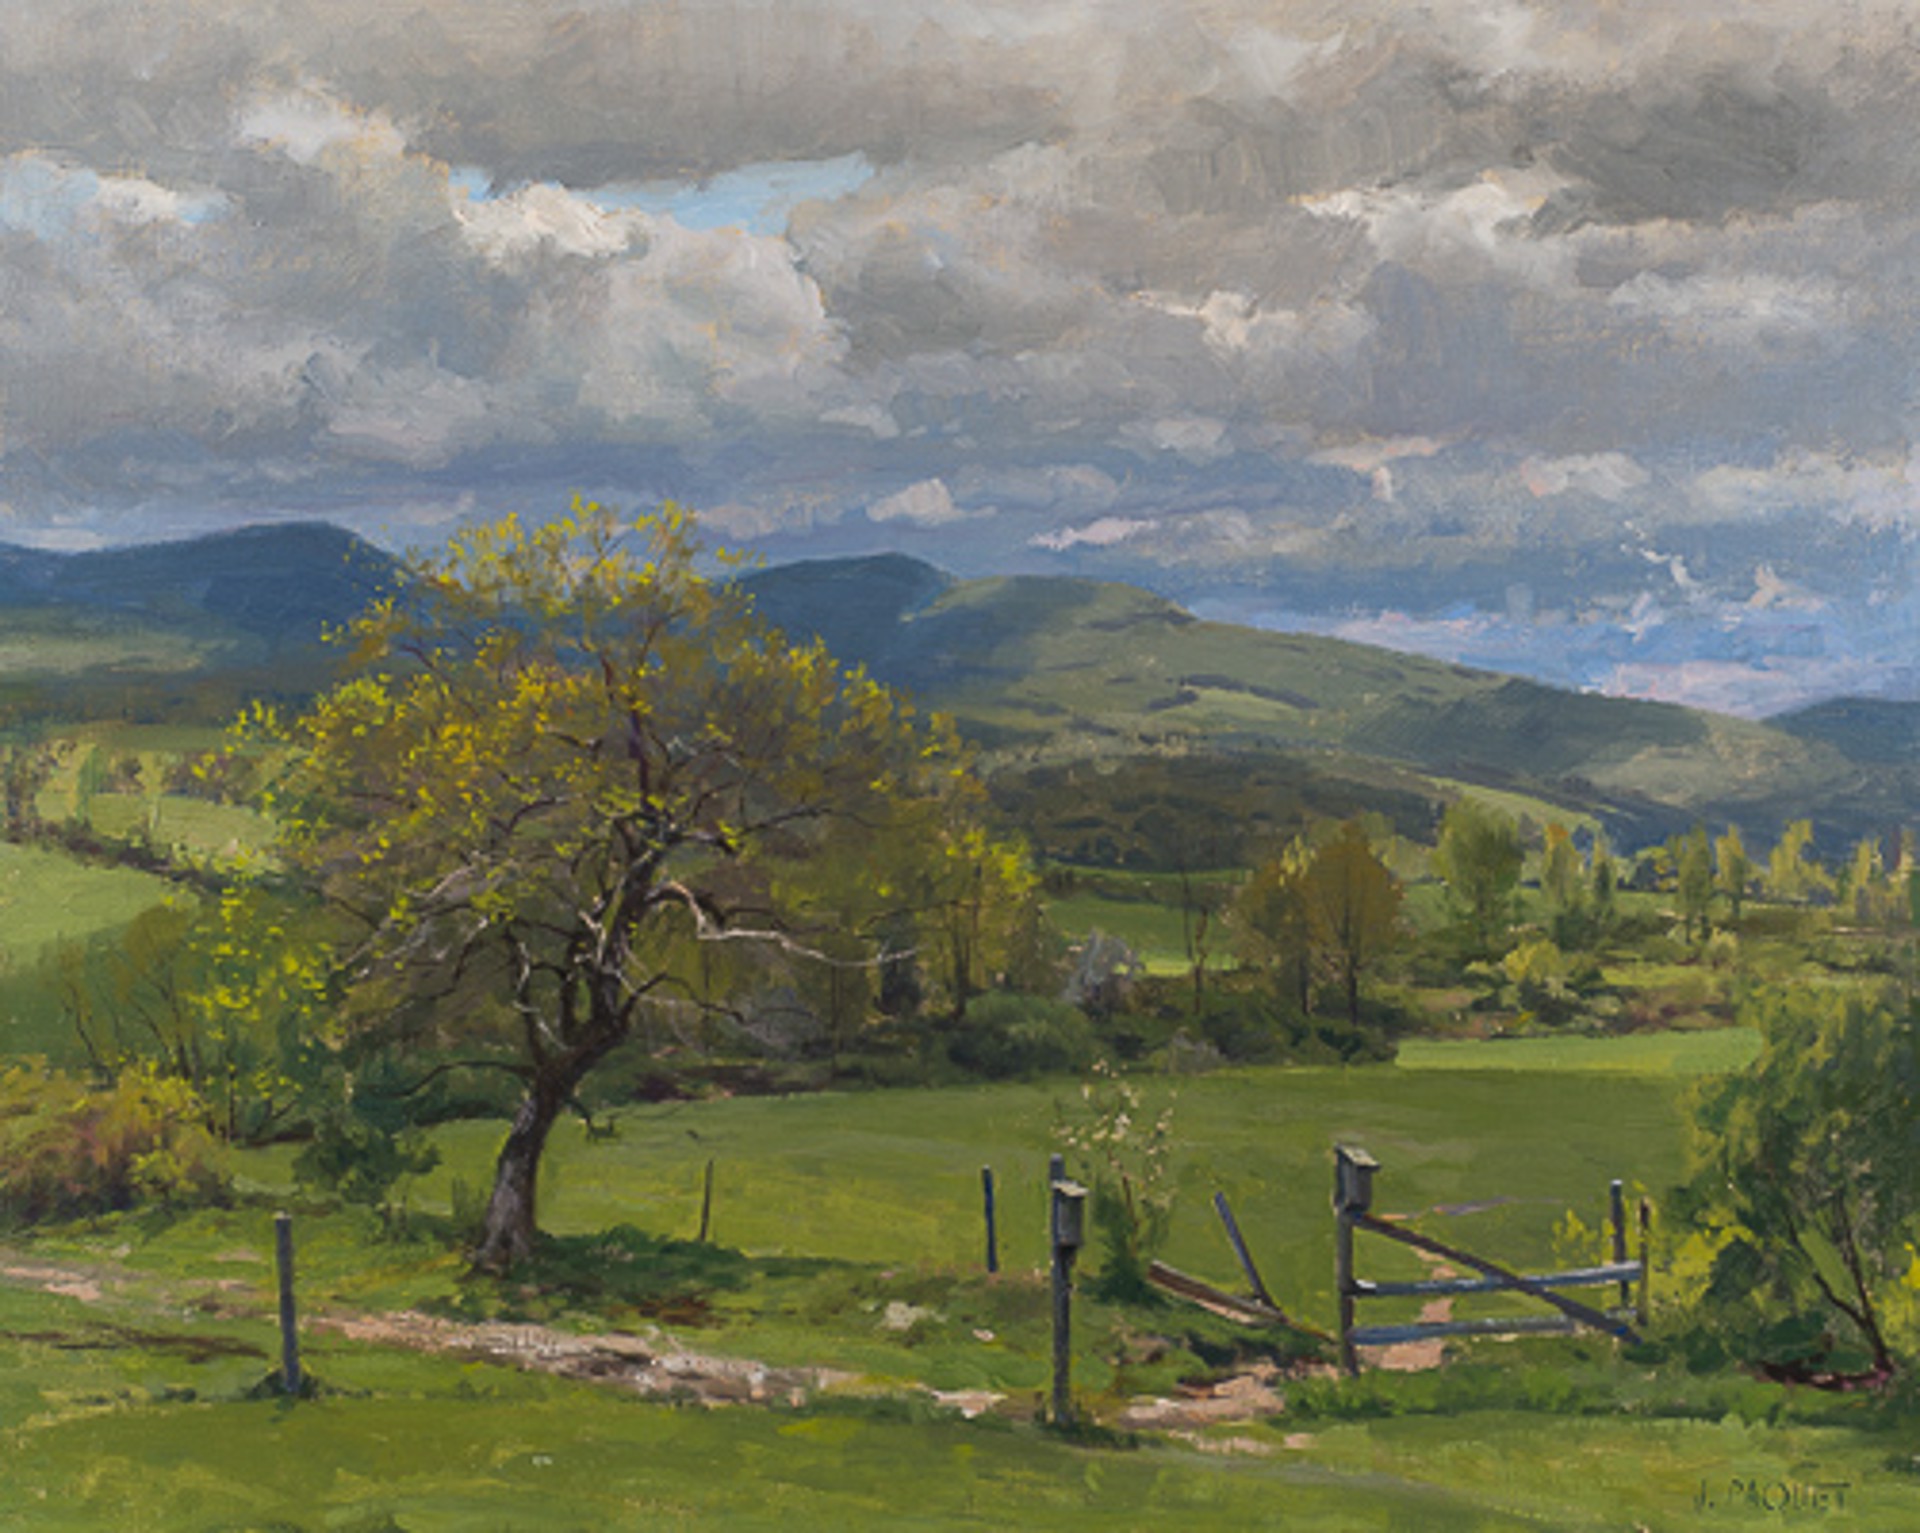 Mohawk Valley Spring by Joseph Paquet